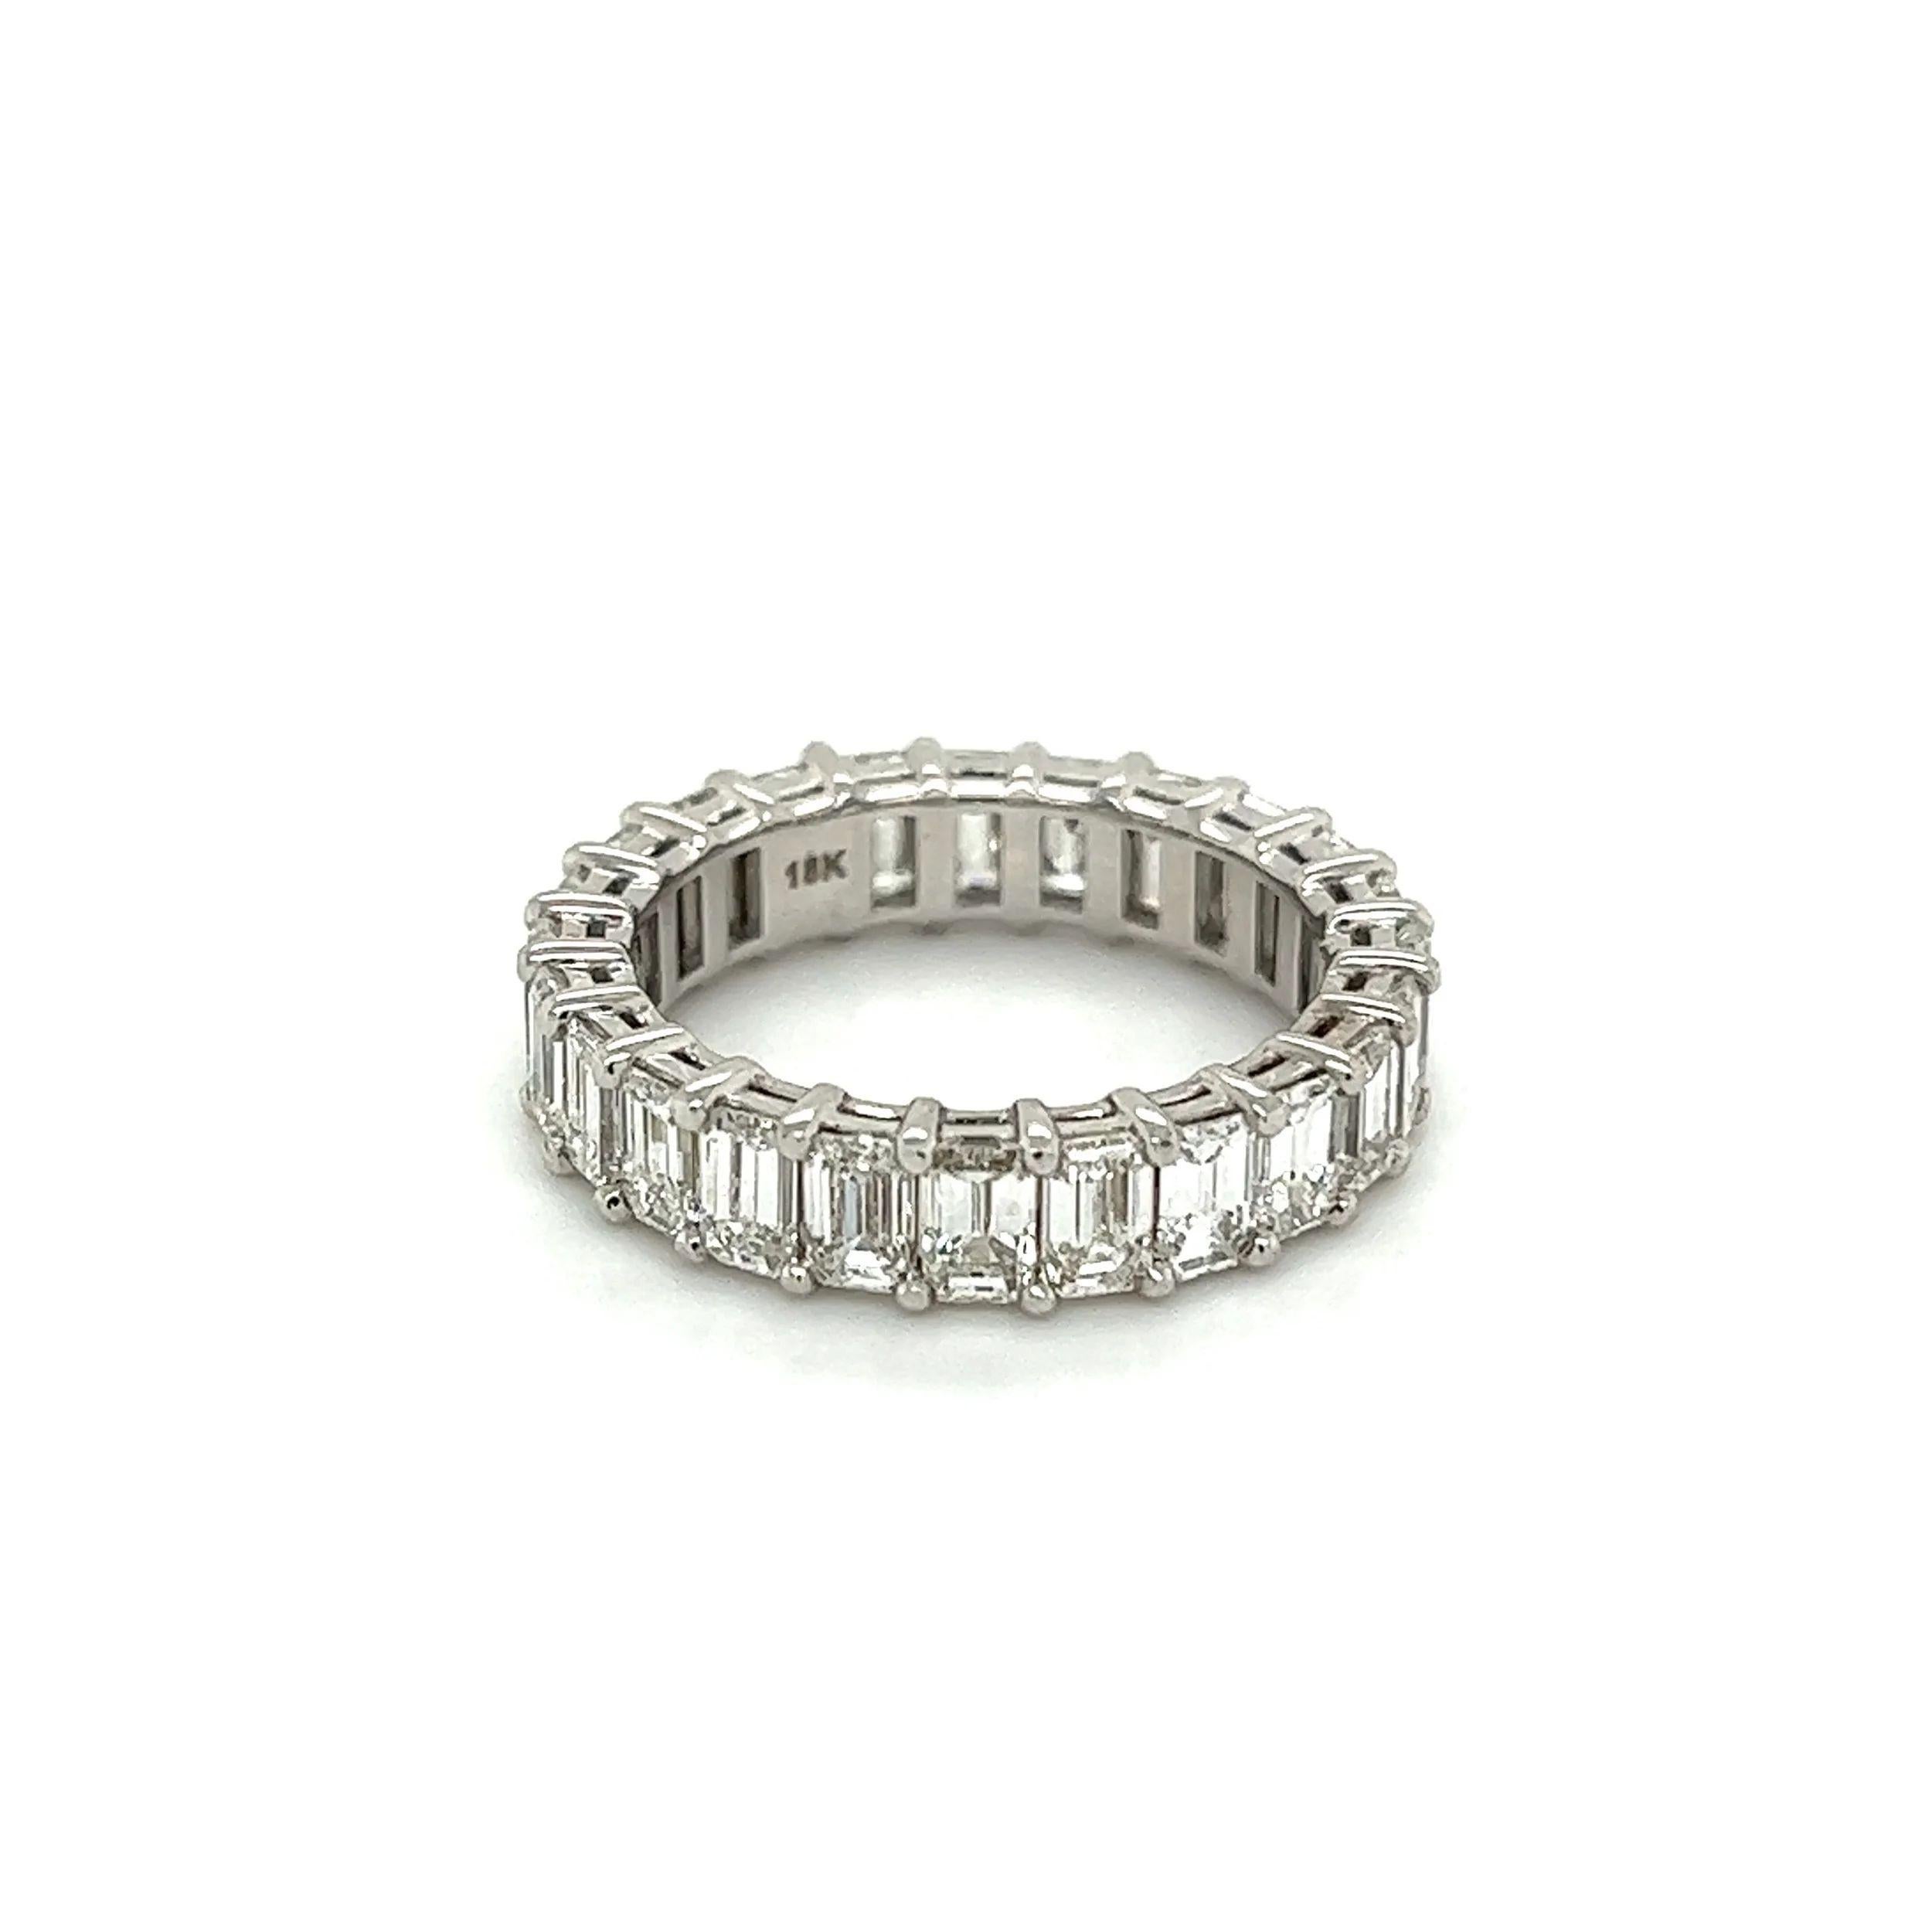 Emerald Cut Diamond Gold Vintage Eternity Band Ring Estate Fine Jewelry In Excellent Condition For Sale In Montreal, QC